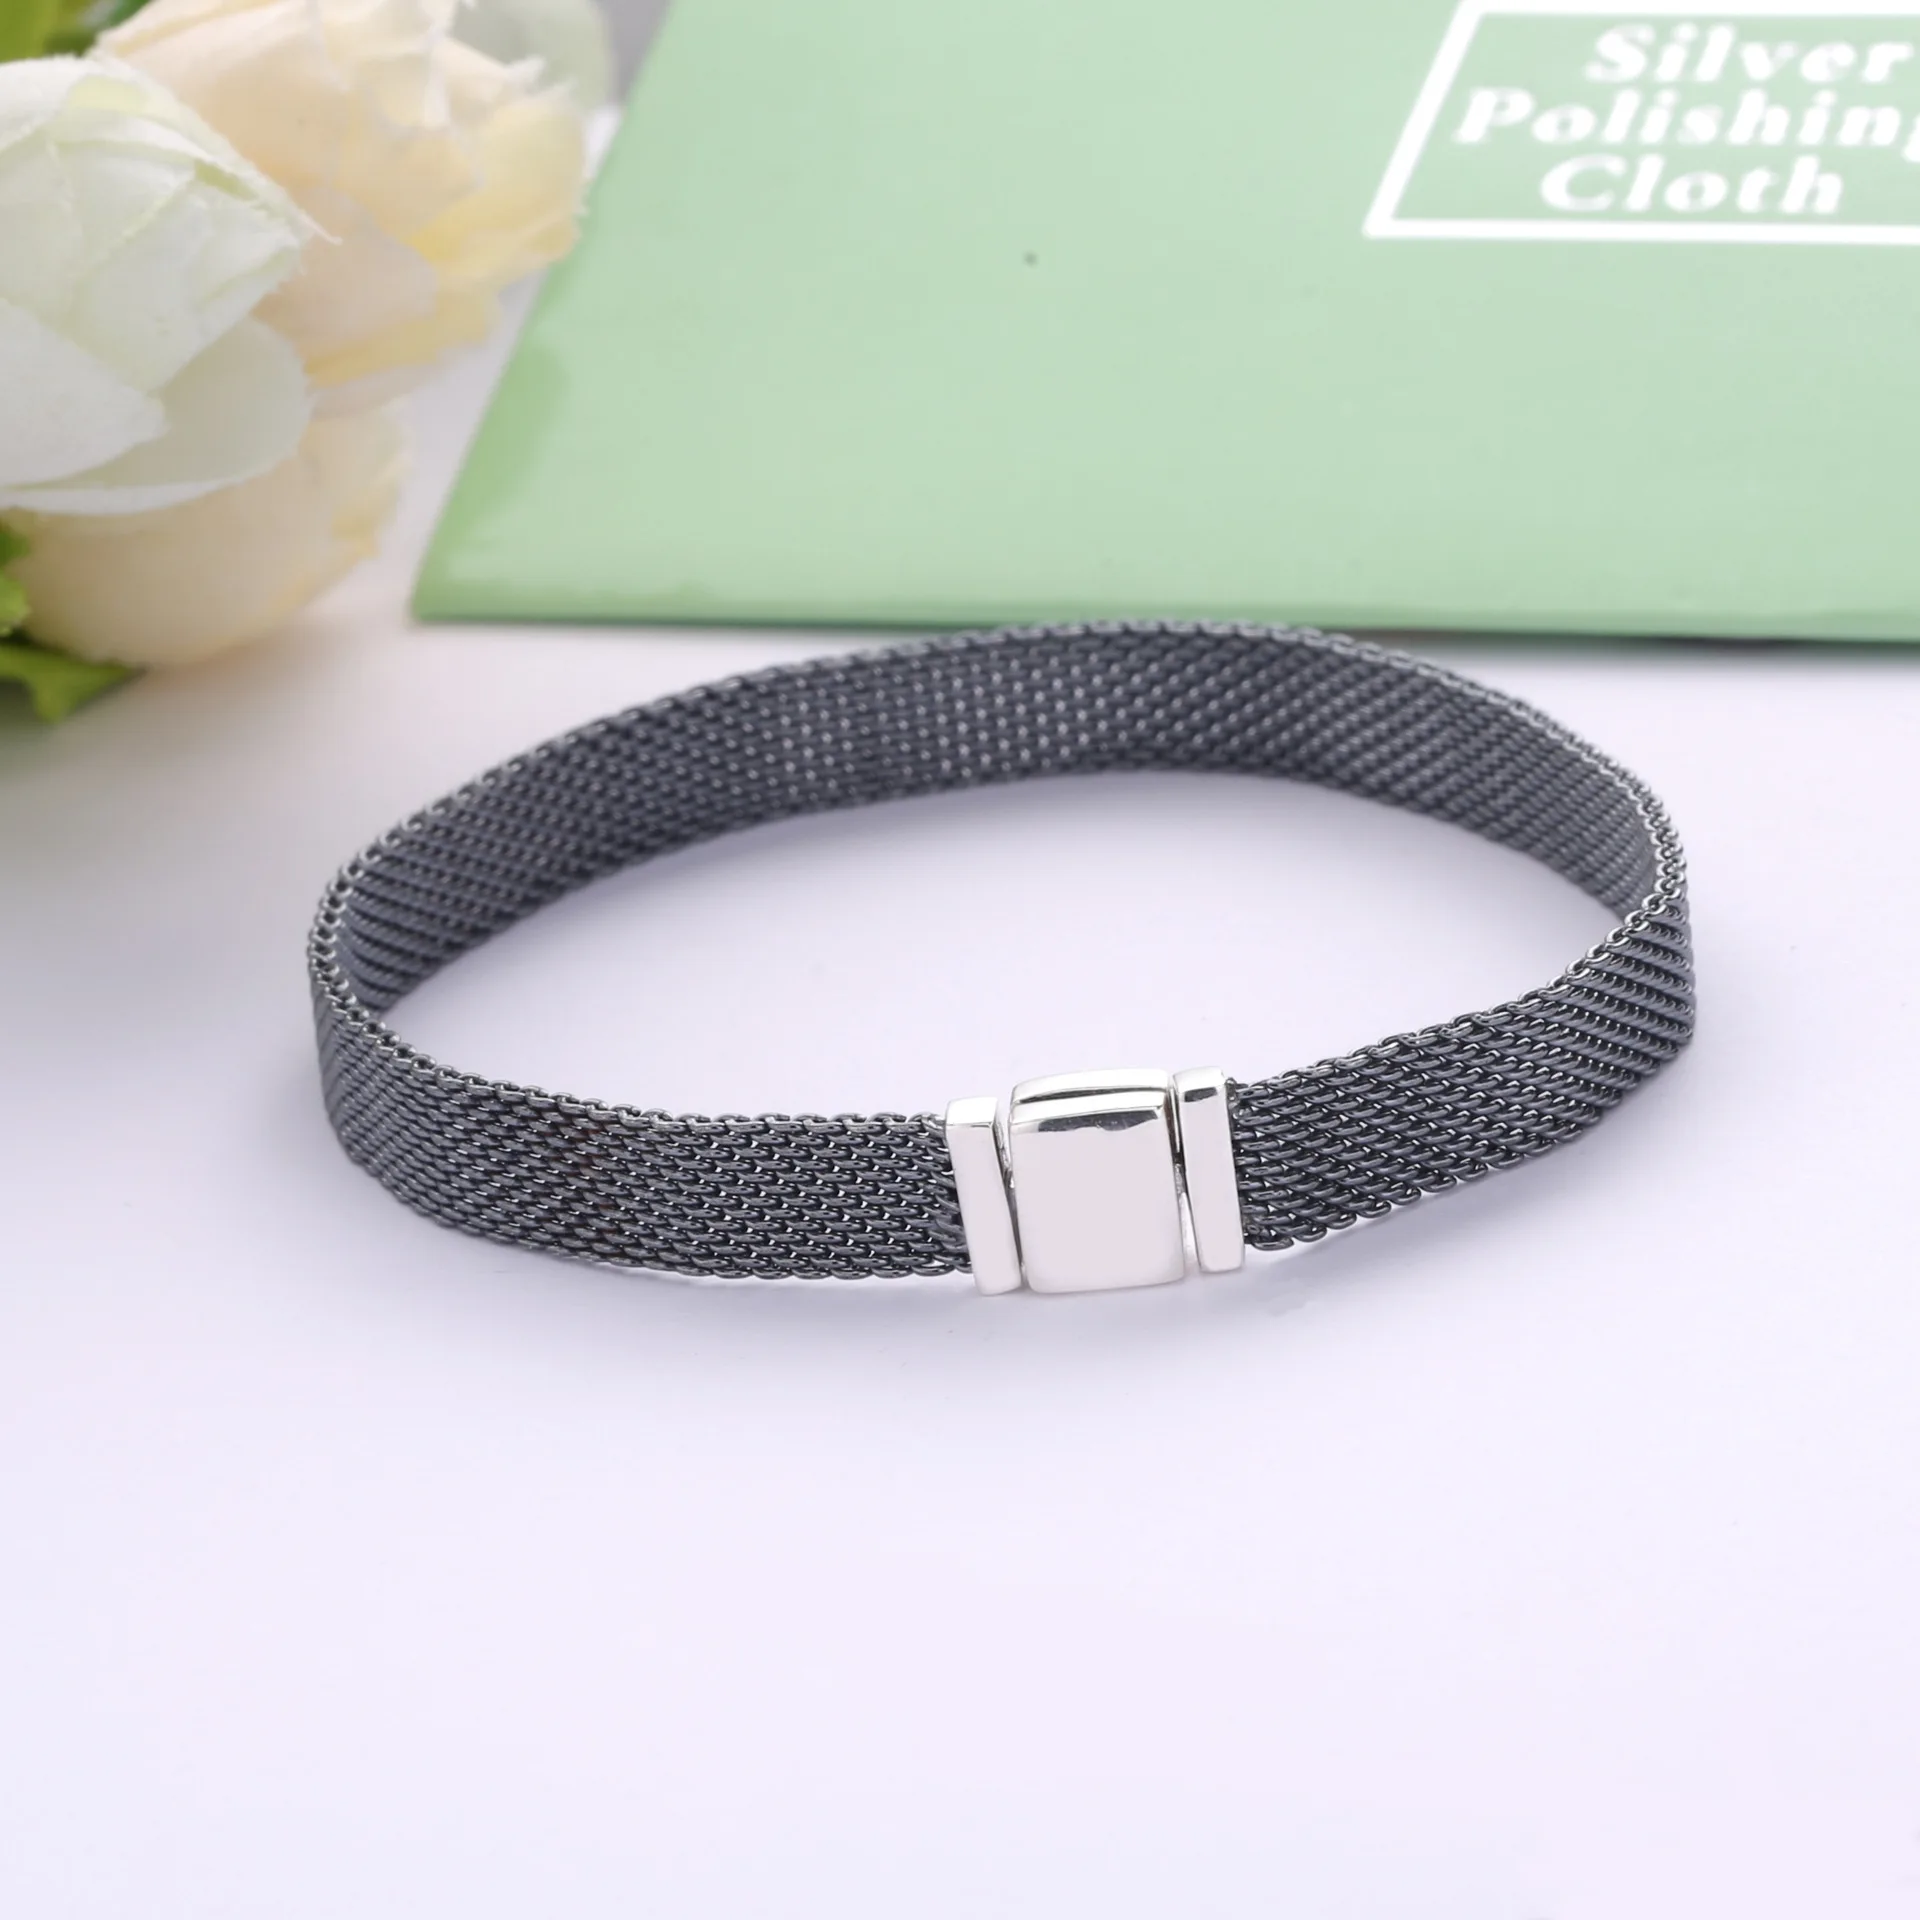 

NEW 100% 925 Silver pan Fit Charms Reflexions Mesh Bracelet Oxidised Mesh Personality cool DIY Accessories Gifts